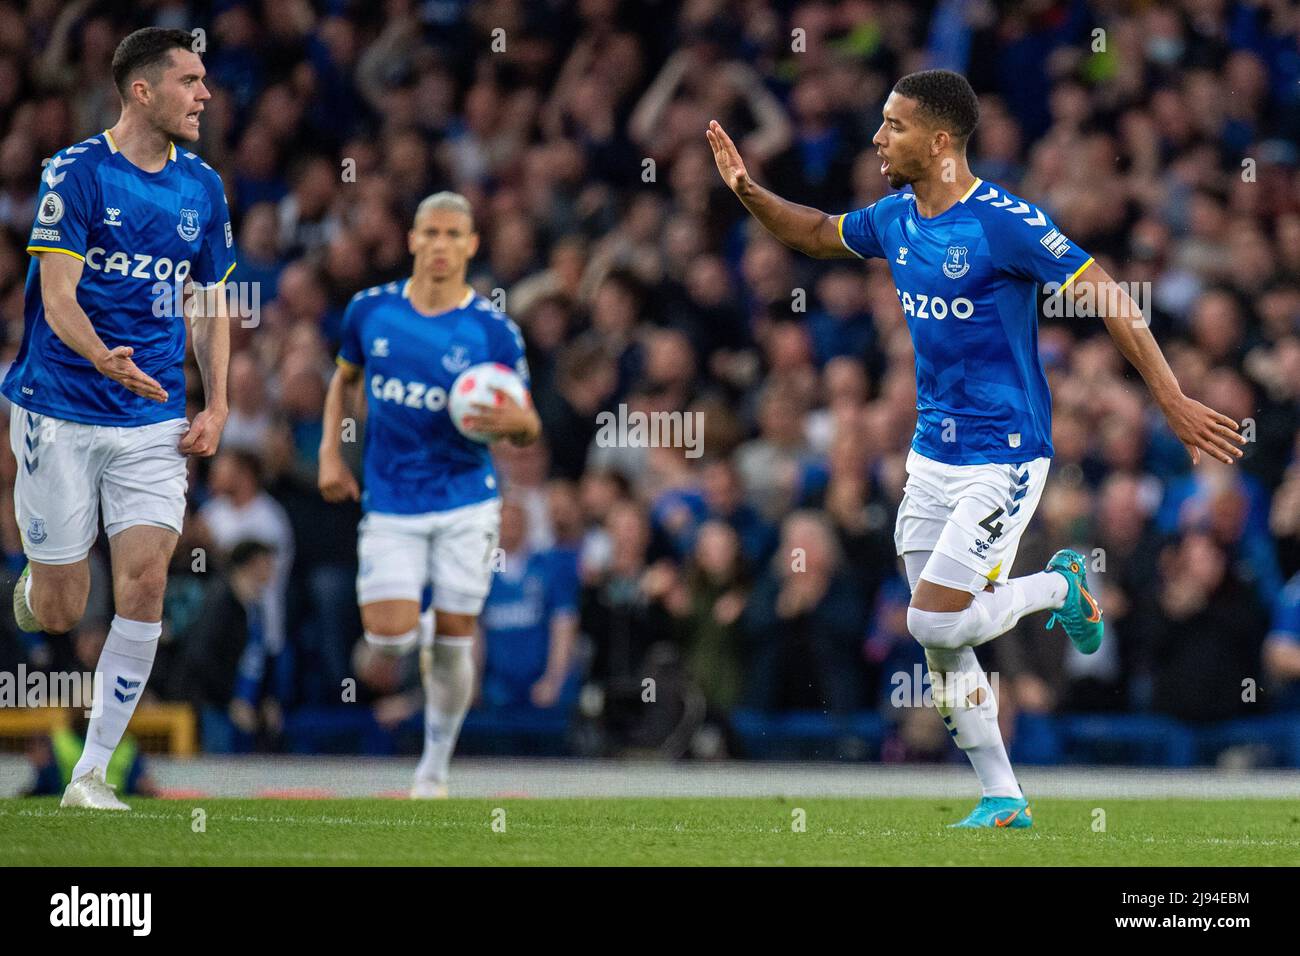 LIVERPOOL, ENGLAND - MAY 19: Michael Keane of Everton celebrates with Mason Holgate after scoring goal during the Premier League match between Everton and Crystal Palace at Goodison Park on May 19, 2022 in Liverpool, United Kingdom. (Photo by Sebastian Frej) Stock Photo